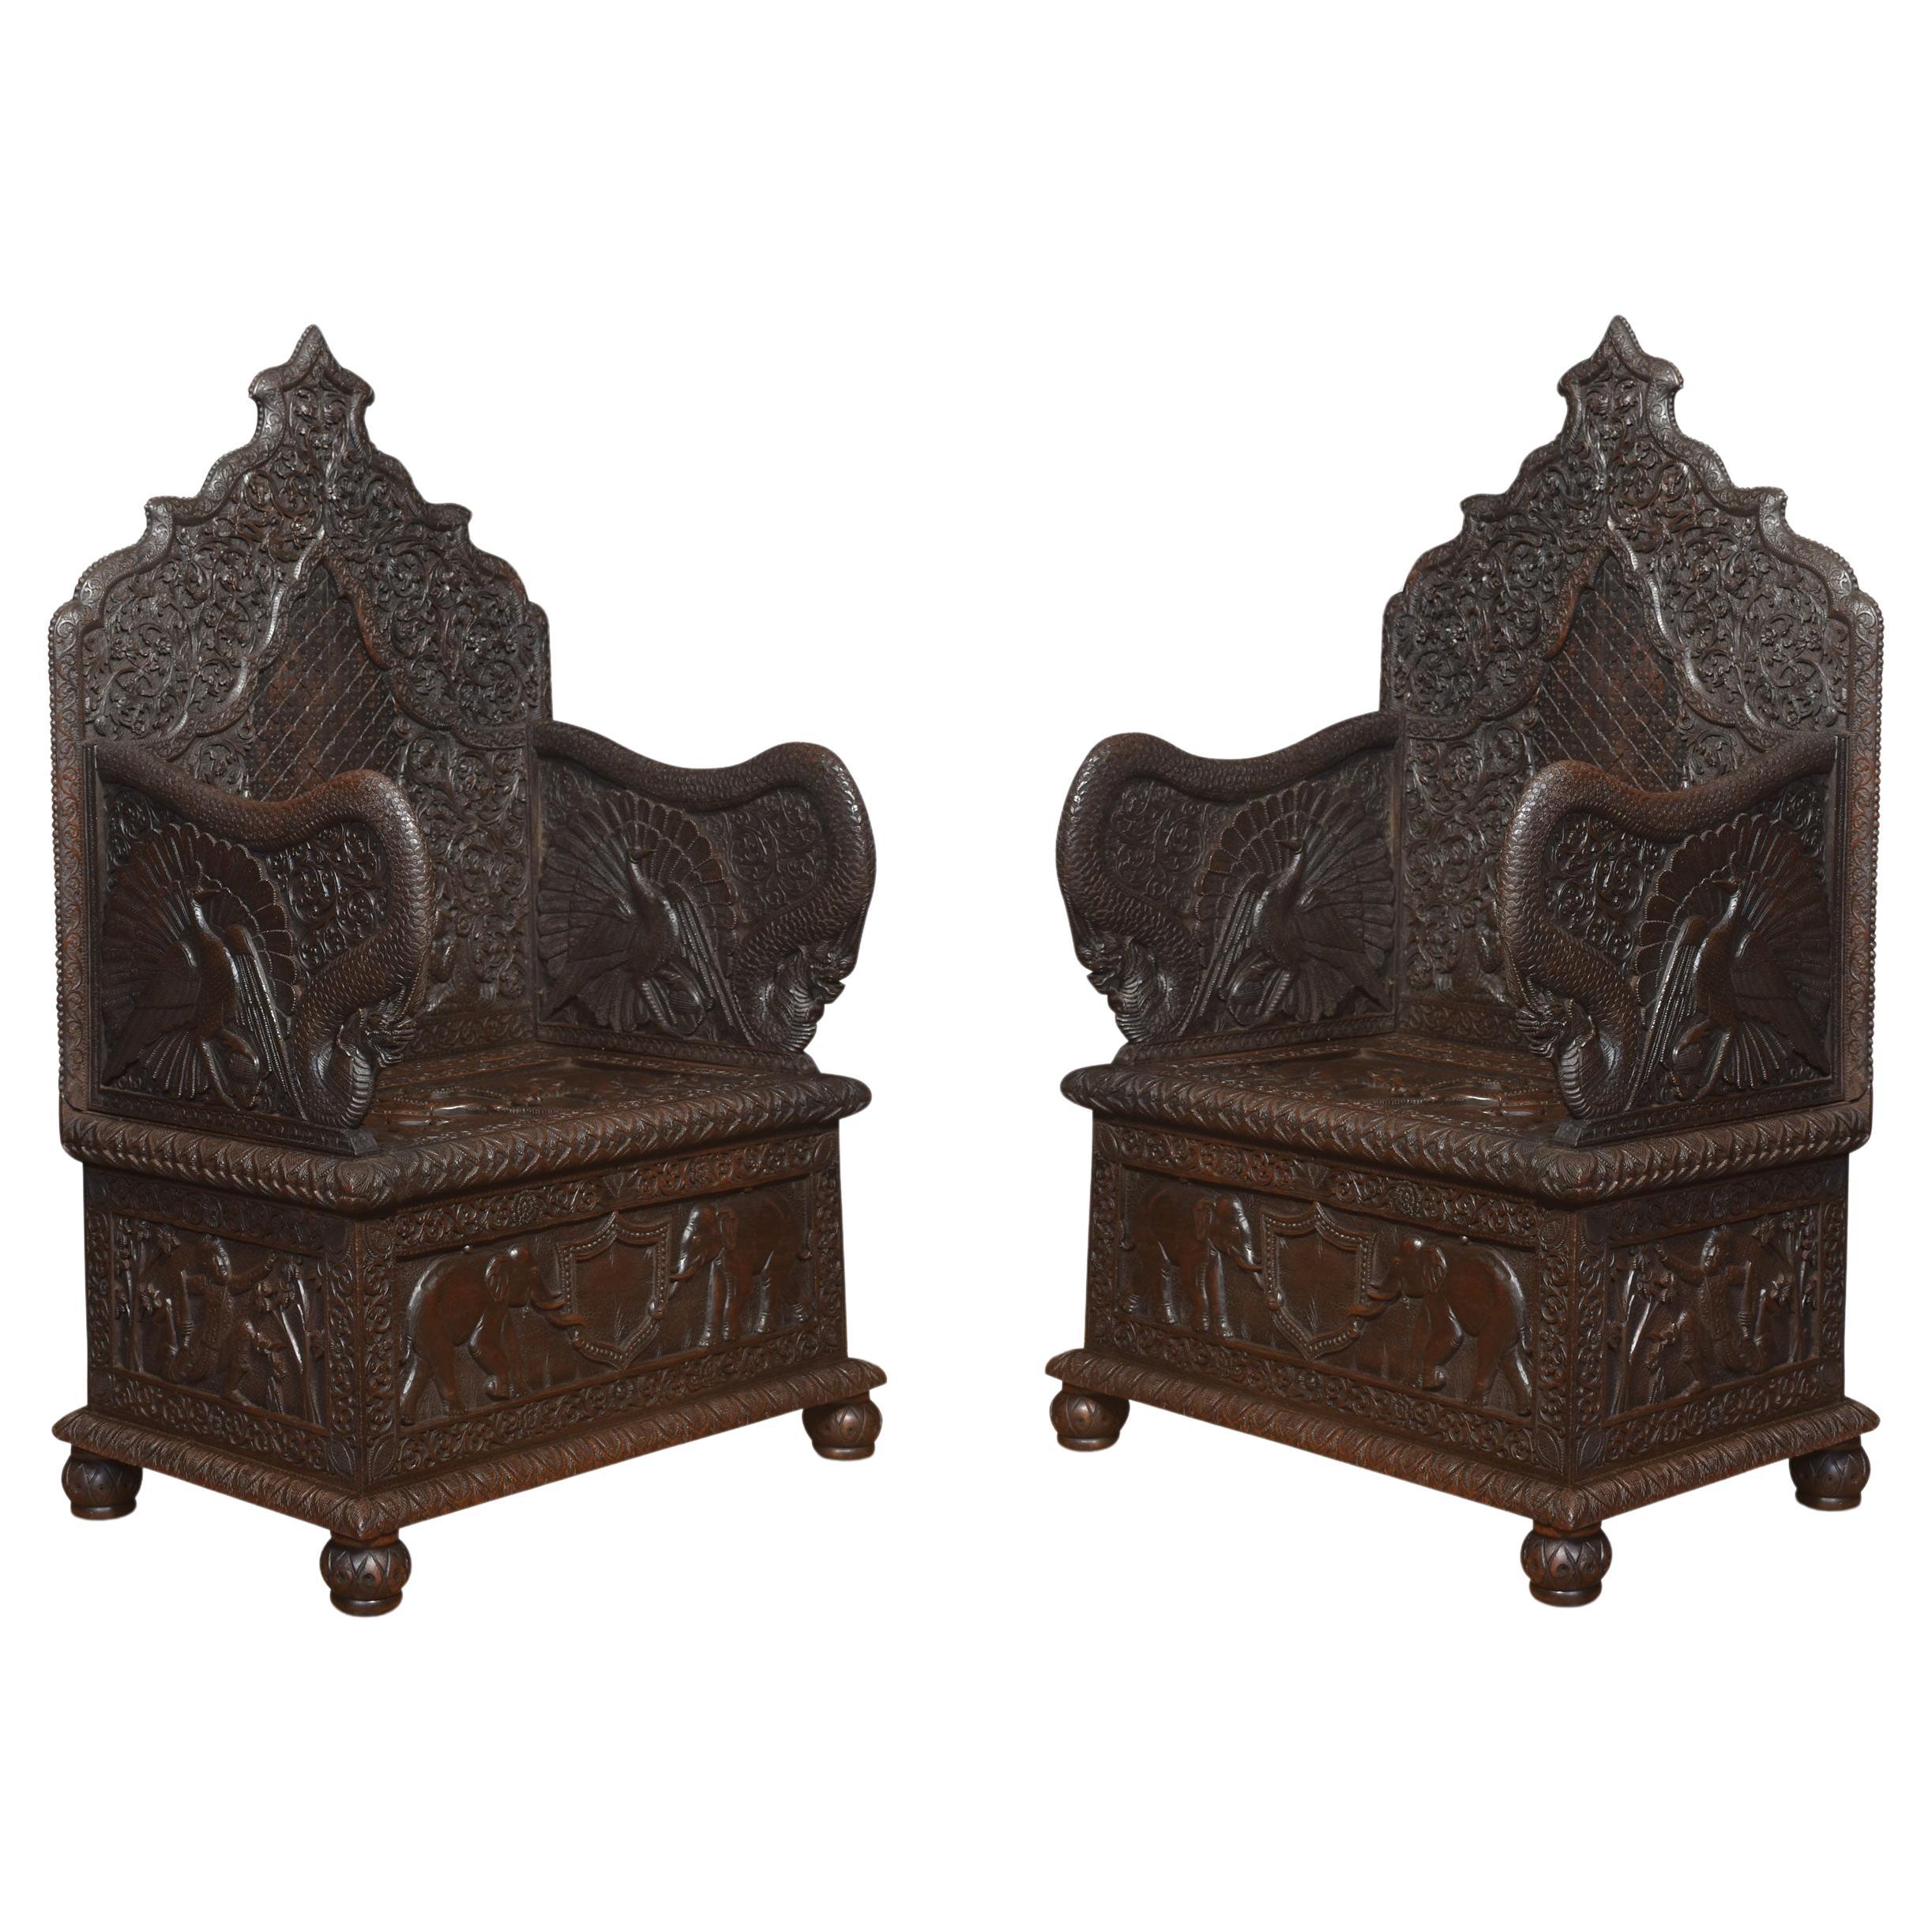 Rare pair of 19th century carved ceremonial armchairs